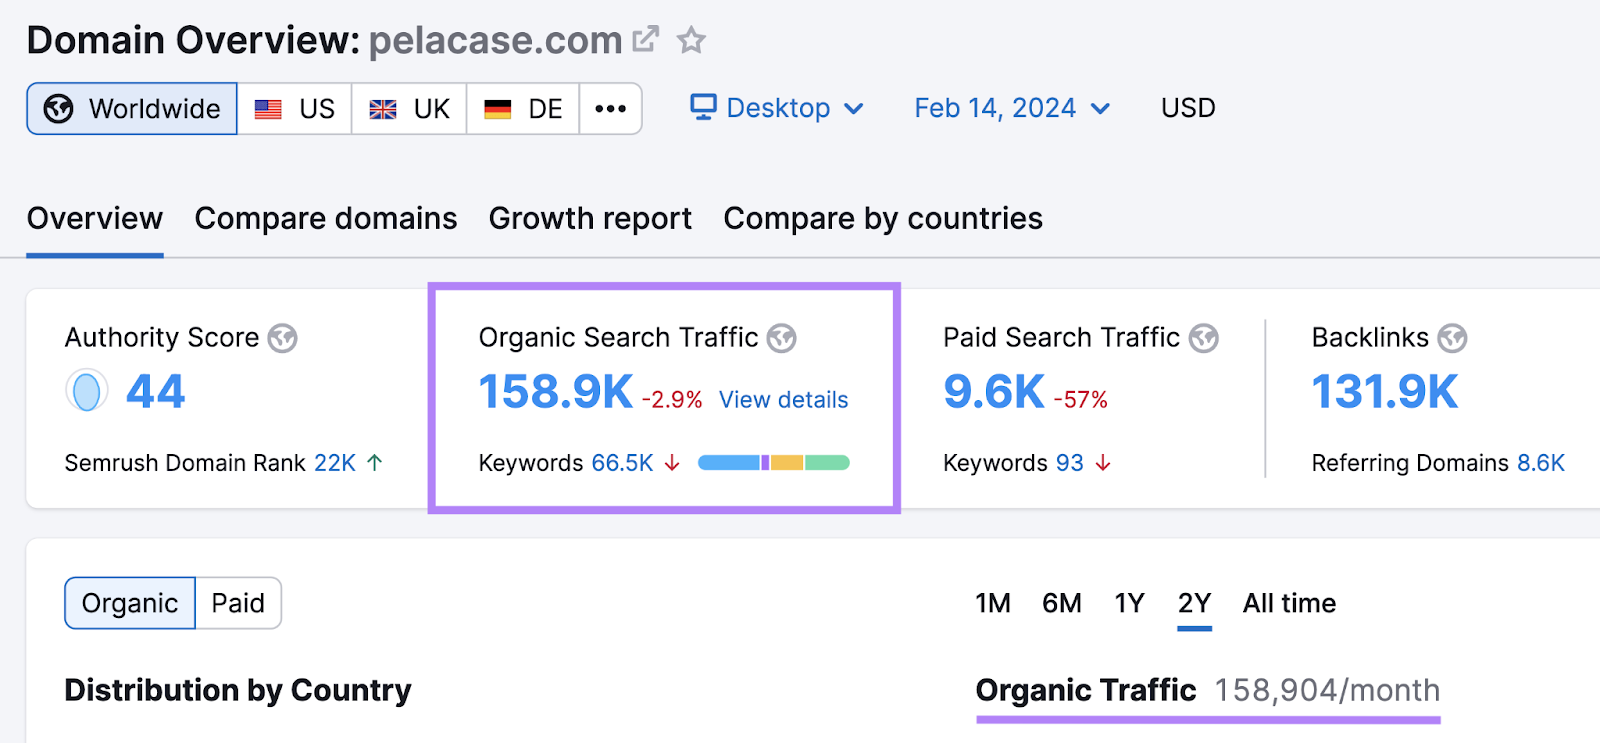 "Organic Search Traffic" widget successful  Domain Overview instrumentality   shows 158.9K visits per period  for "pelacase.com"